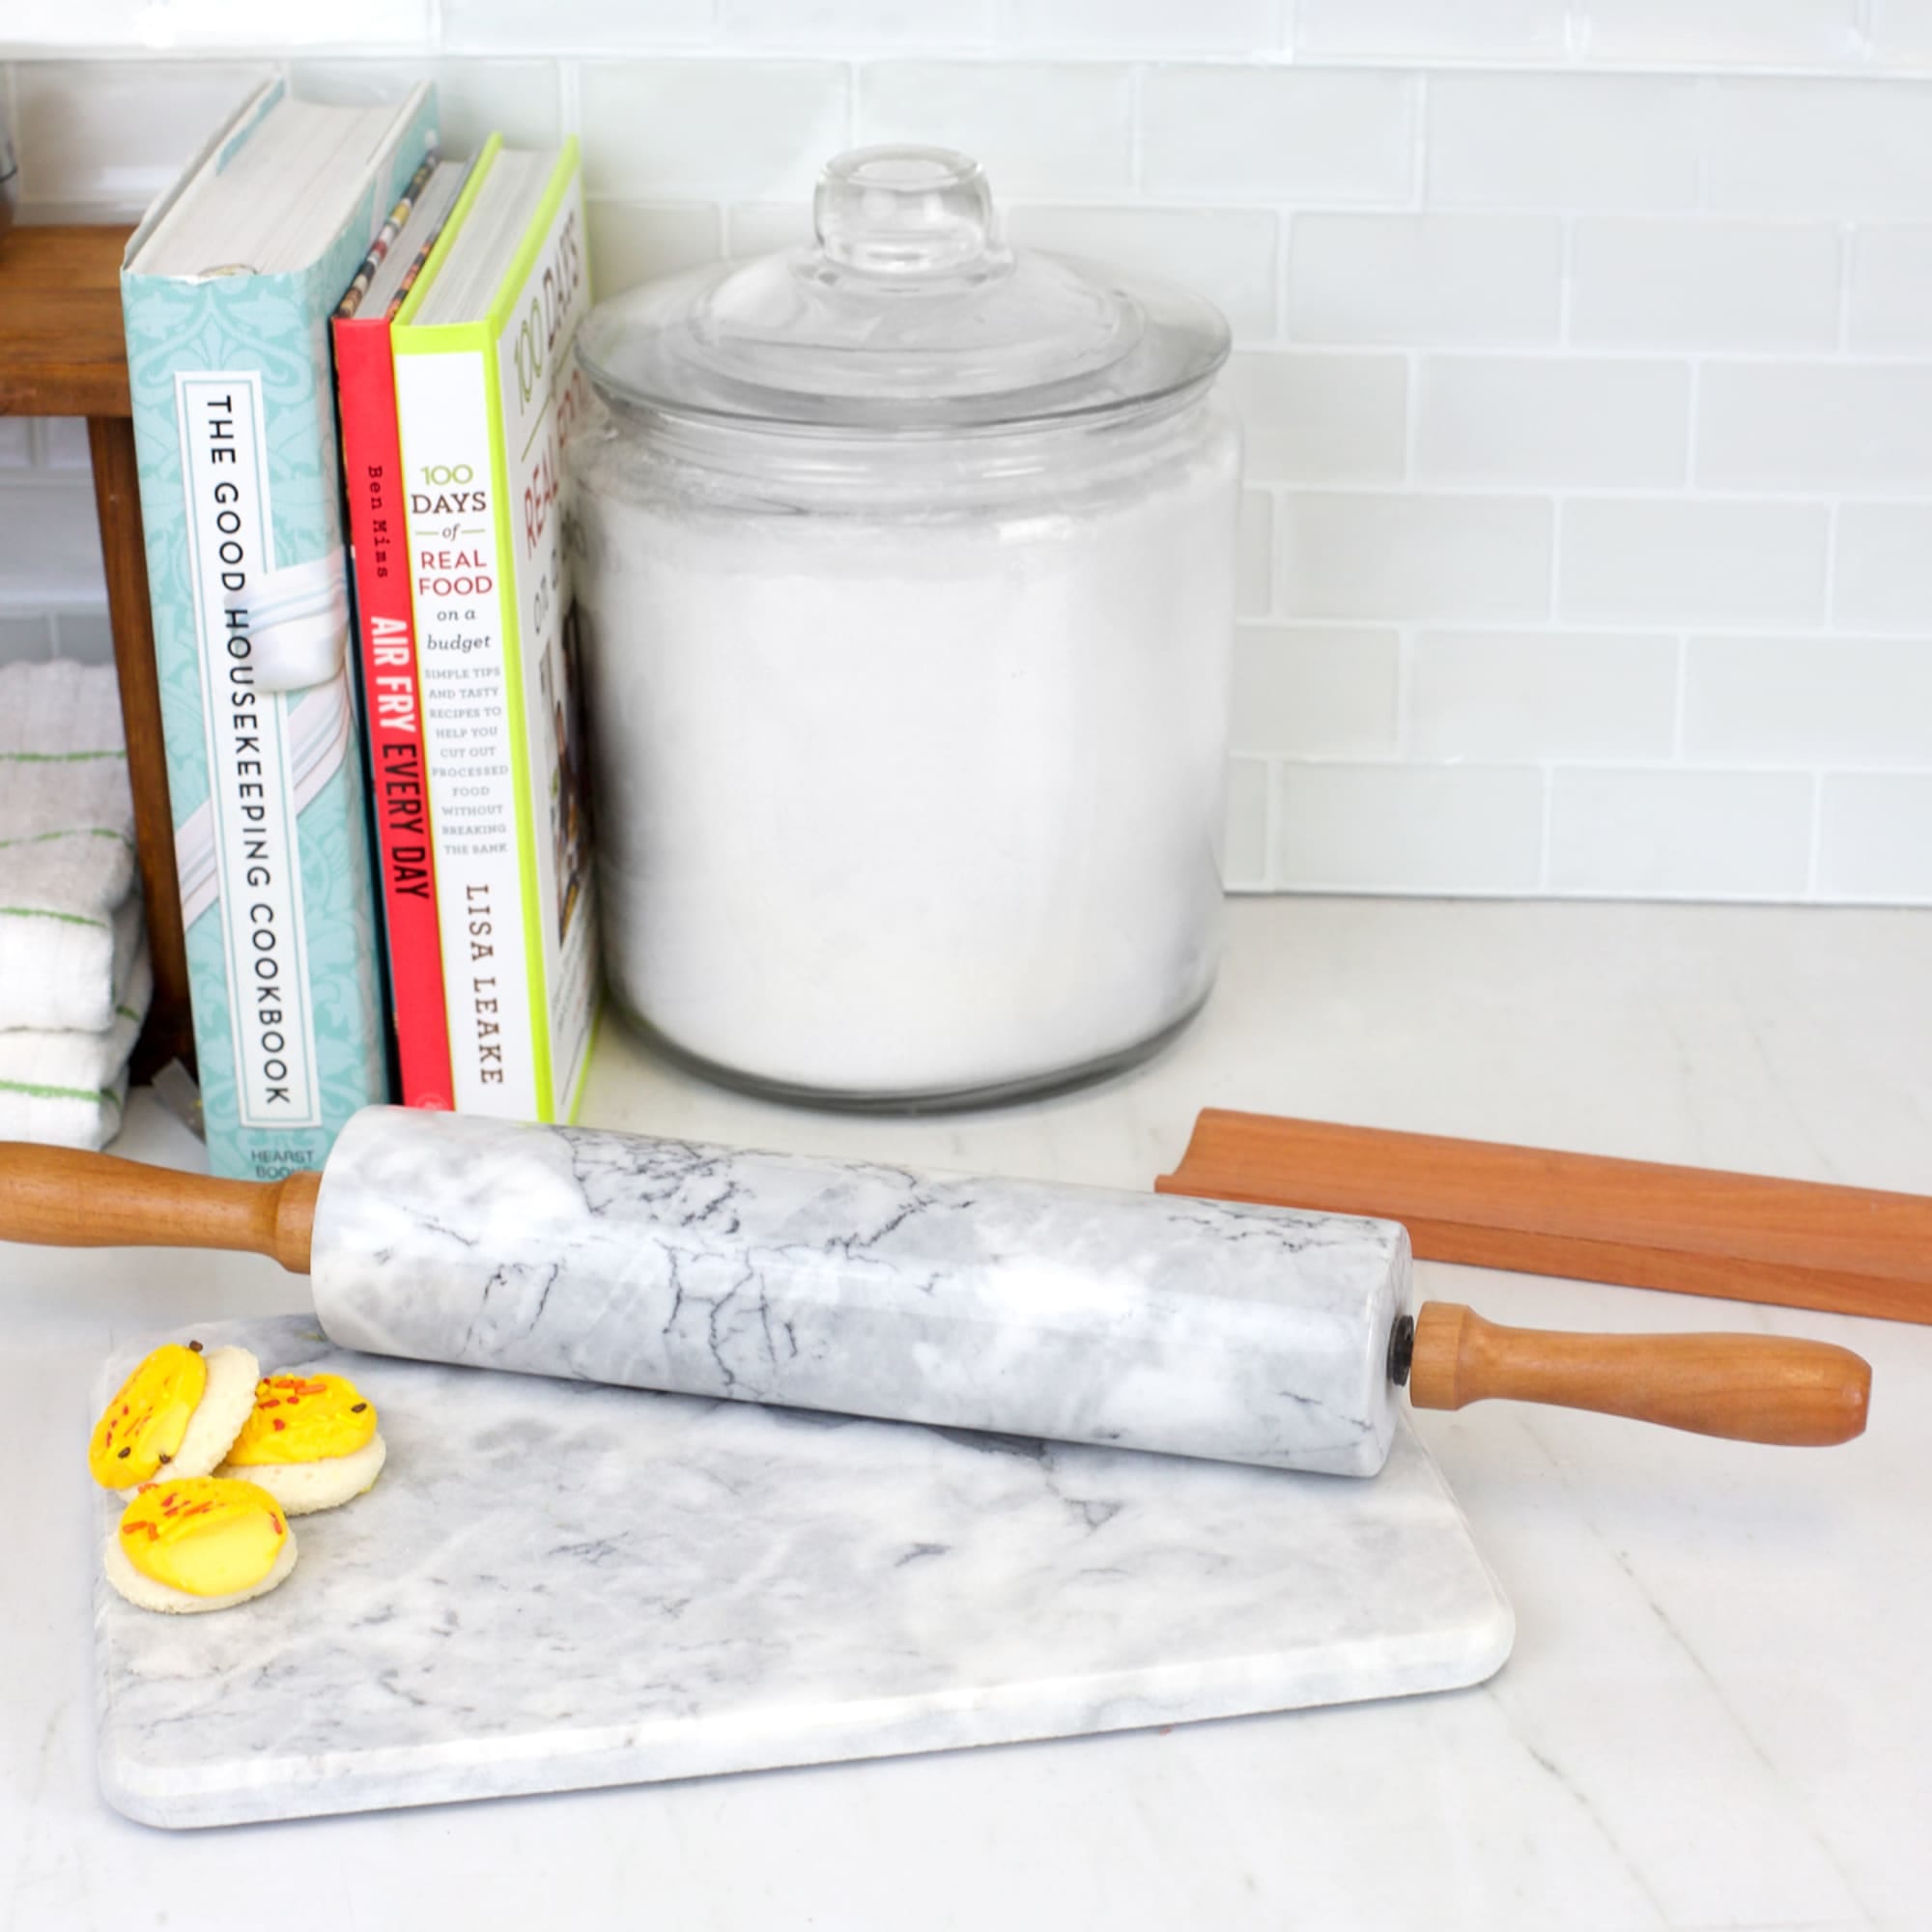 Home Basics Marble Rolling Pin with Easy Grip Handles and Display Stand, White $12.00 EACH, CASE PACK OF 6